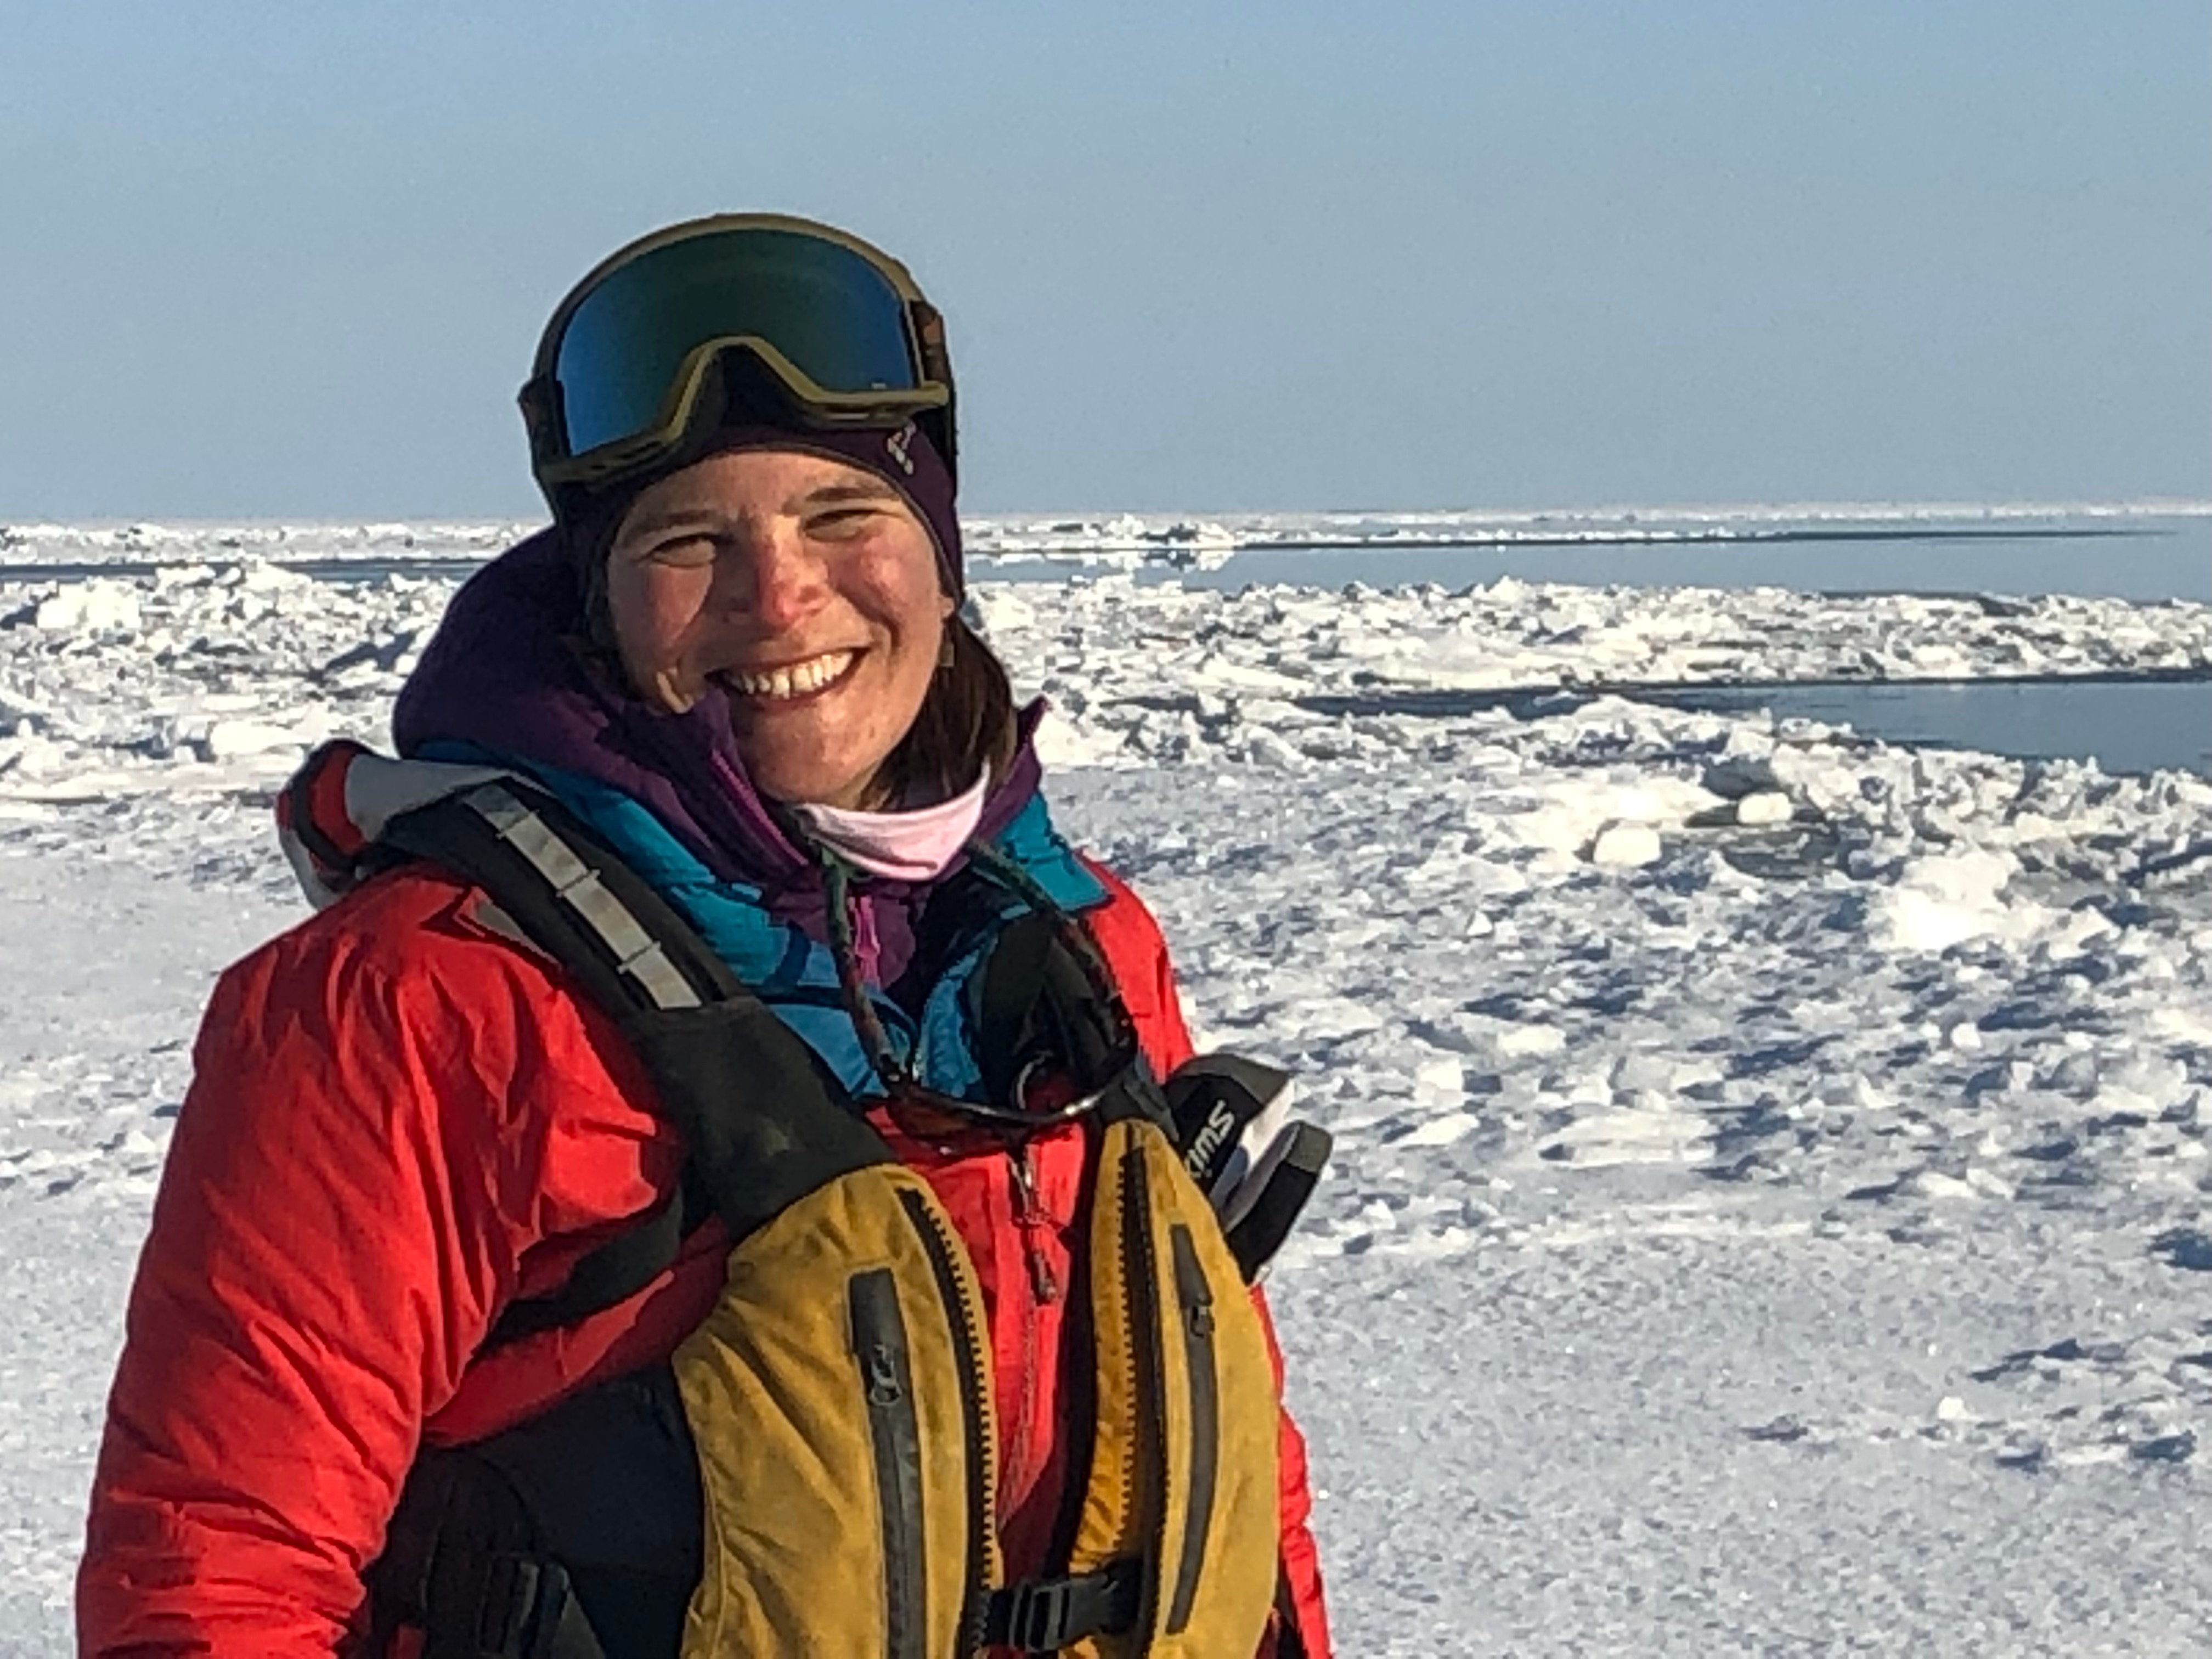 Research Assistant Professor @IARC_Alaska. Marine ecologist & lifelong Alaskan who cares about the ecology of our marine resources & the people who rely on them